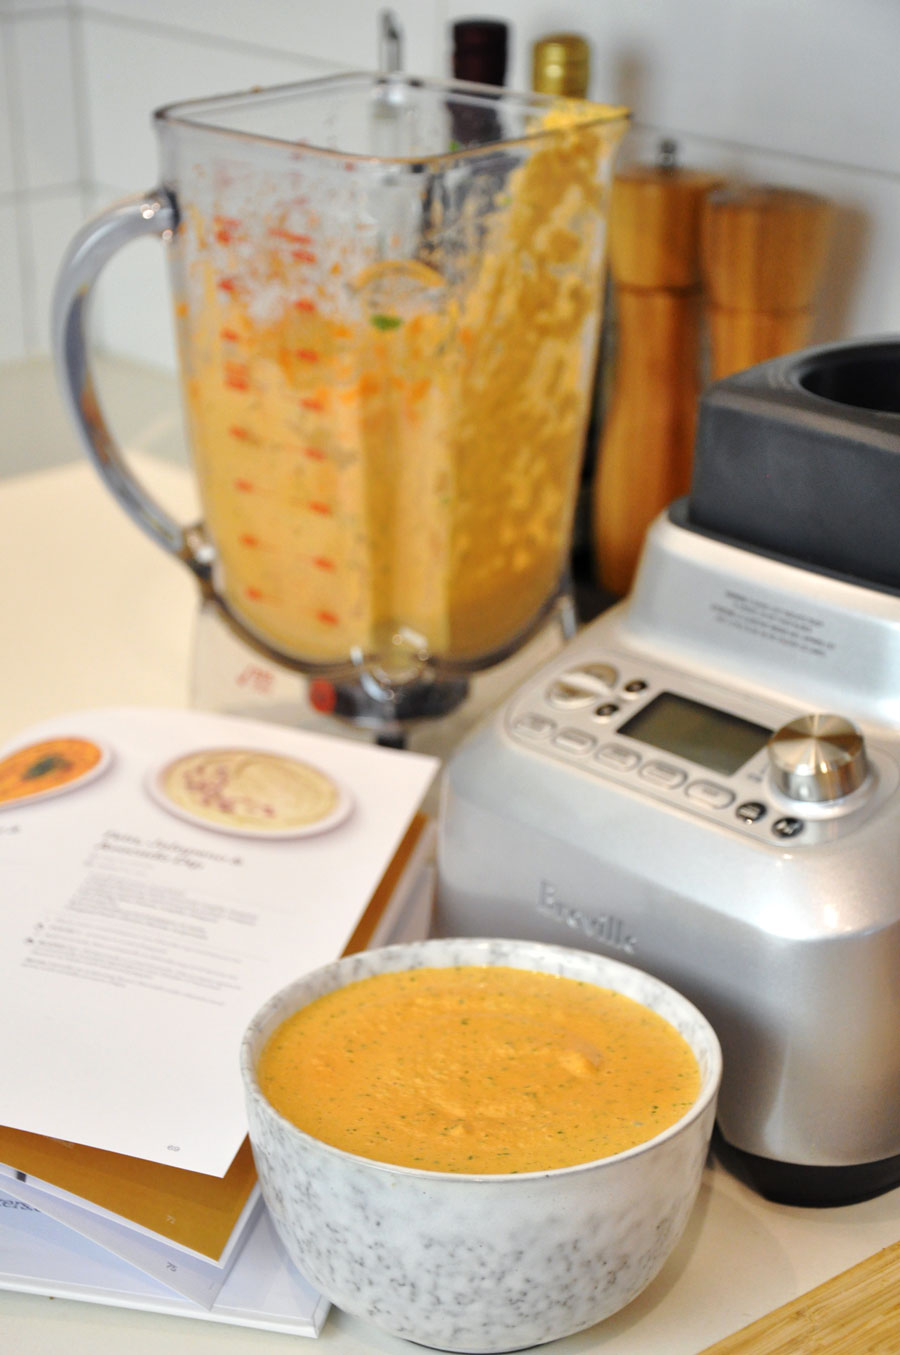 Spiced Carrot Dip Recipe with the Breville Boss